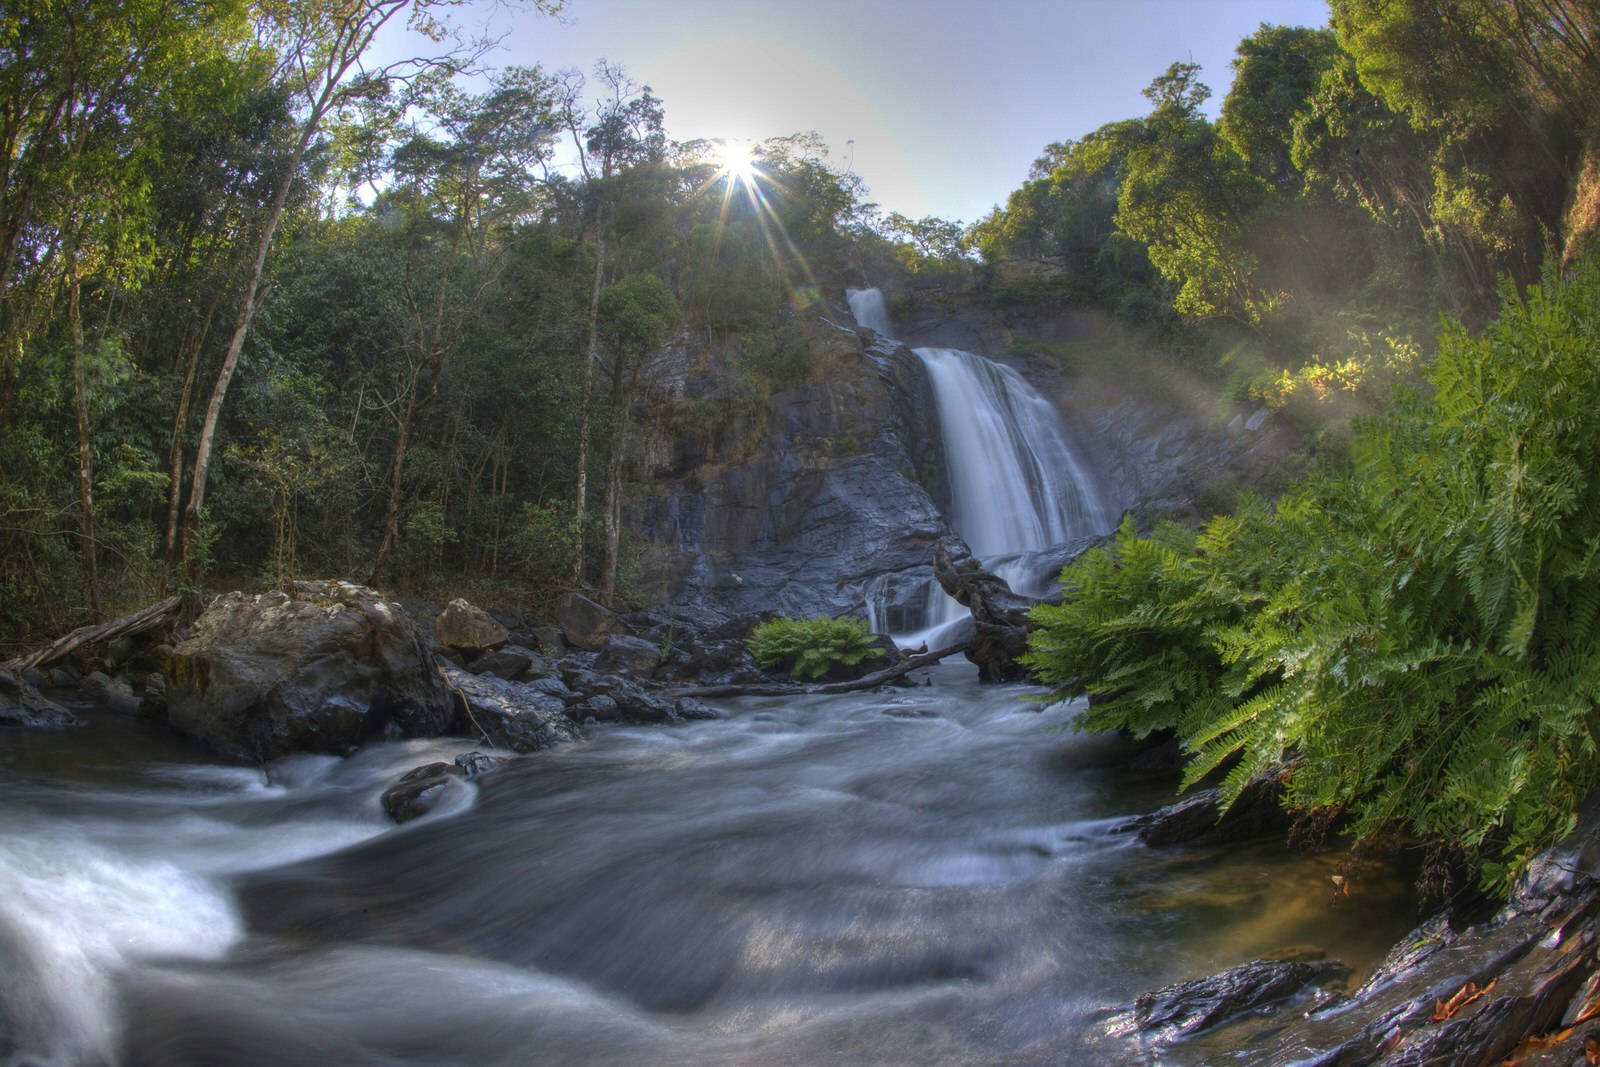 A shot looking up along a fast flowing river to a huge, two-stepped waterfall; surrounding it all is lush forest, with the sun poking through the trees above the cascading water